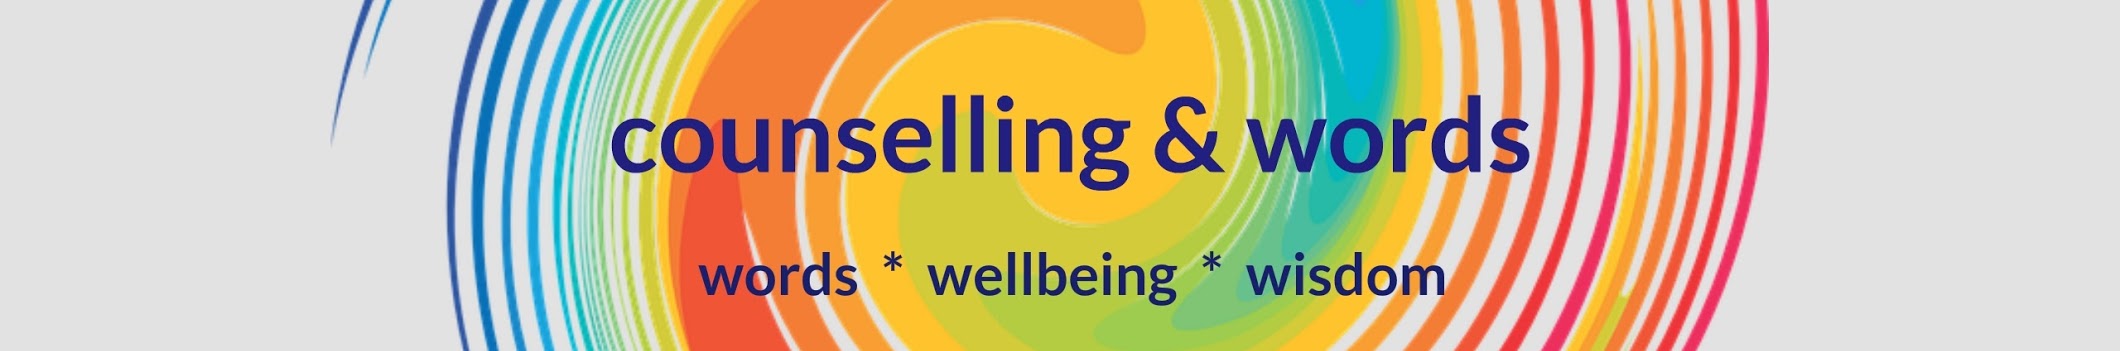 Counselling and Words – Words, Wellbeing, Wisdom